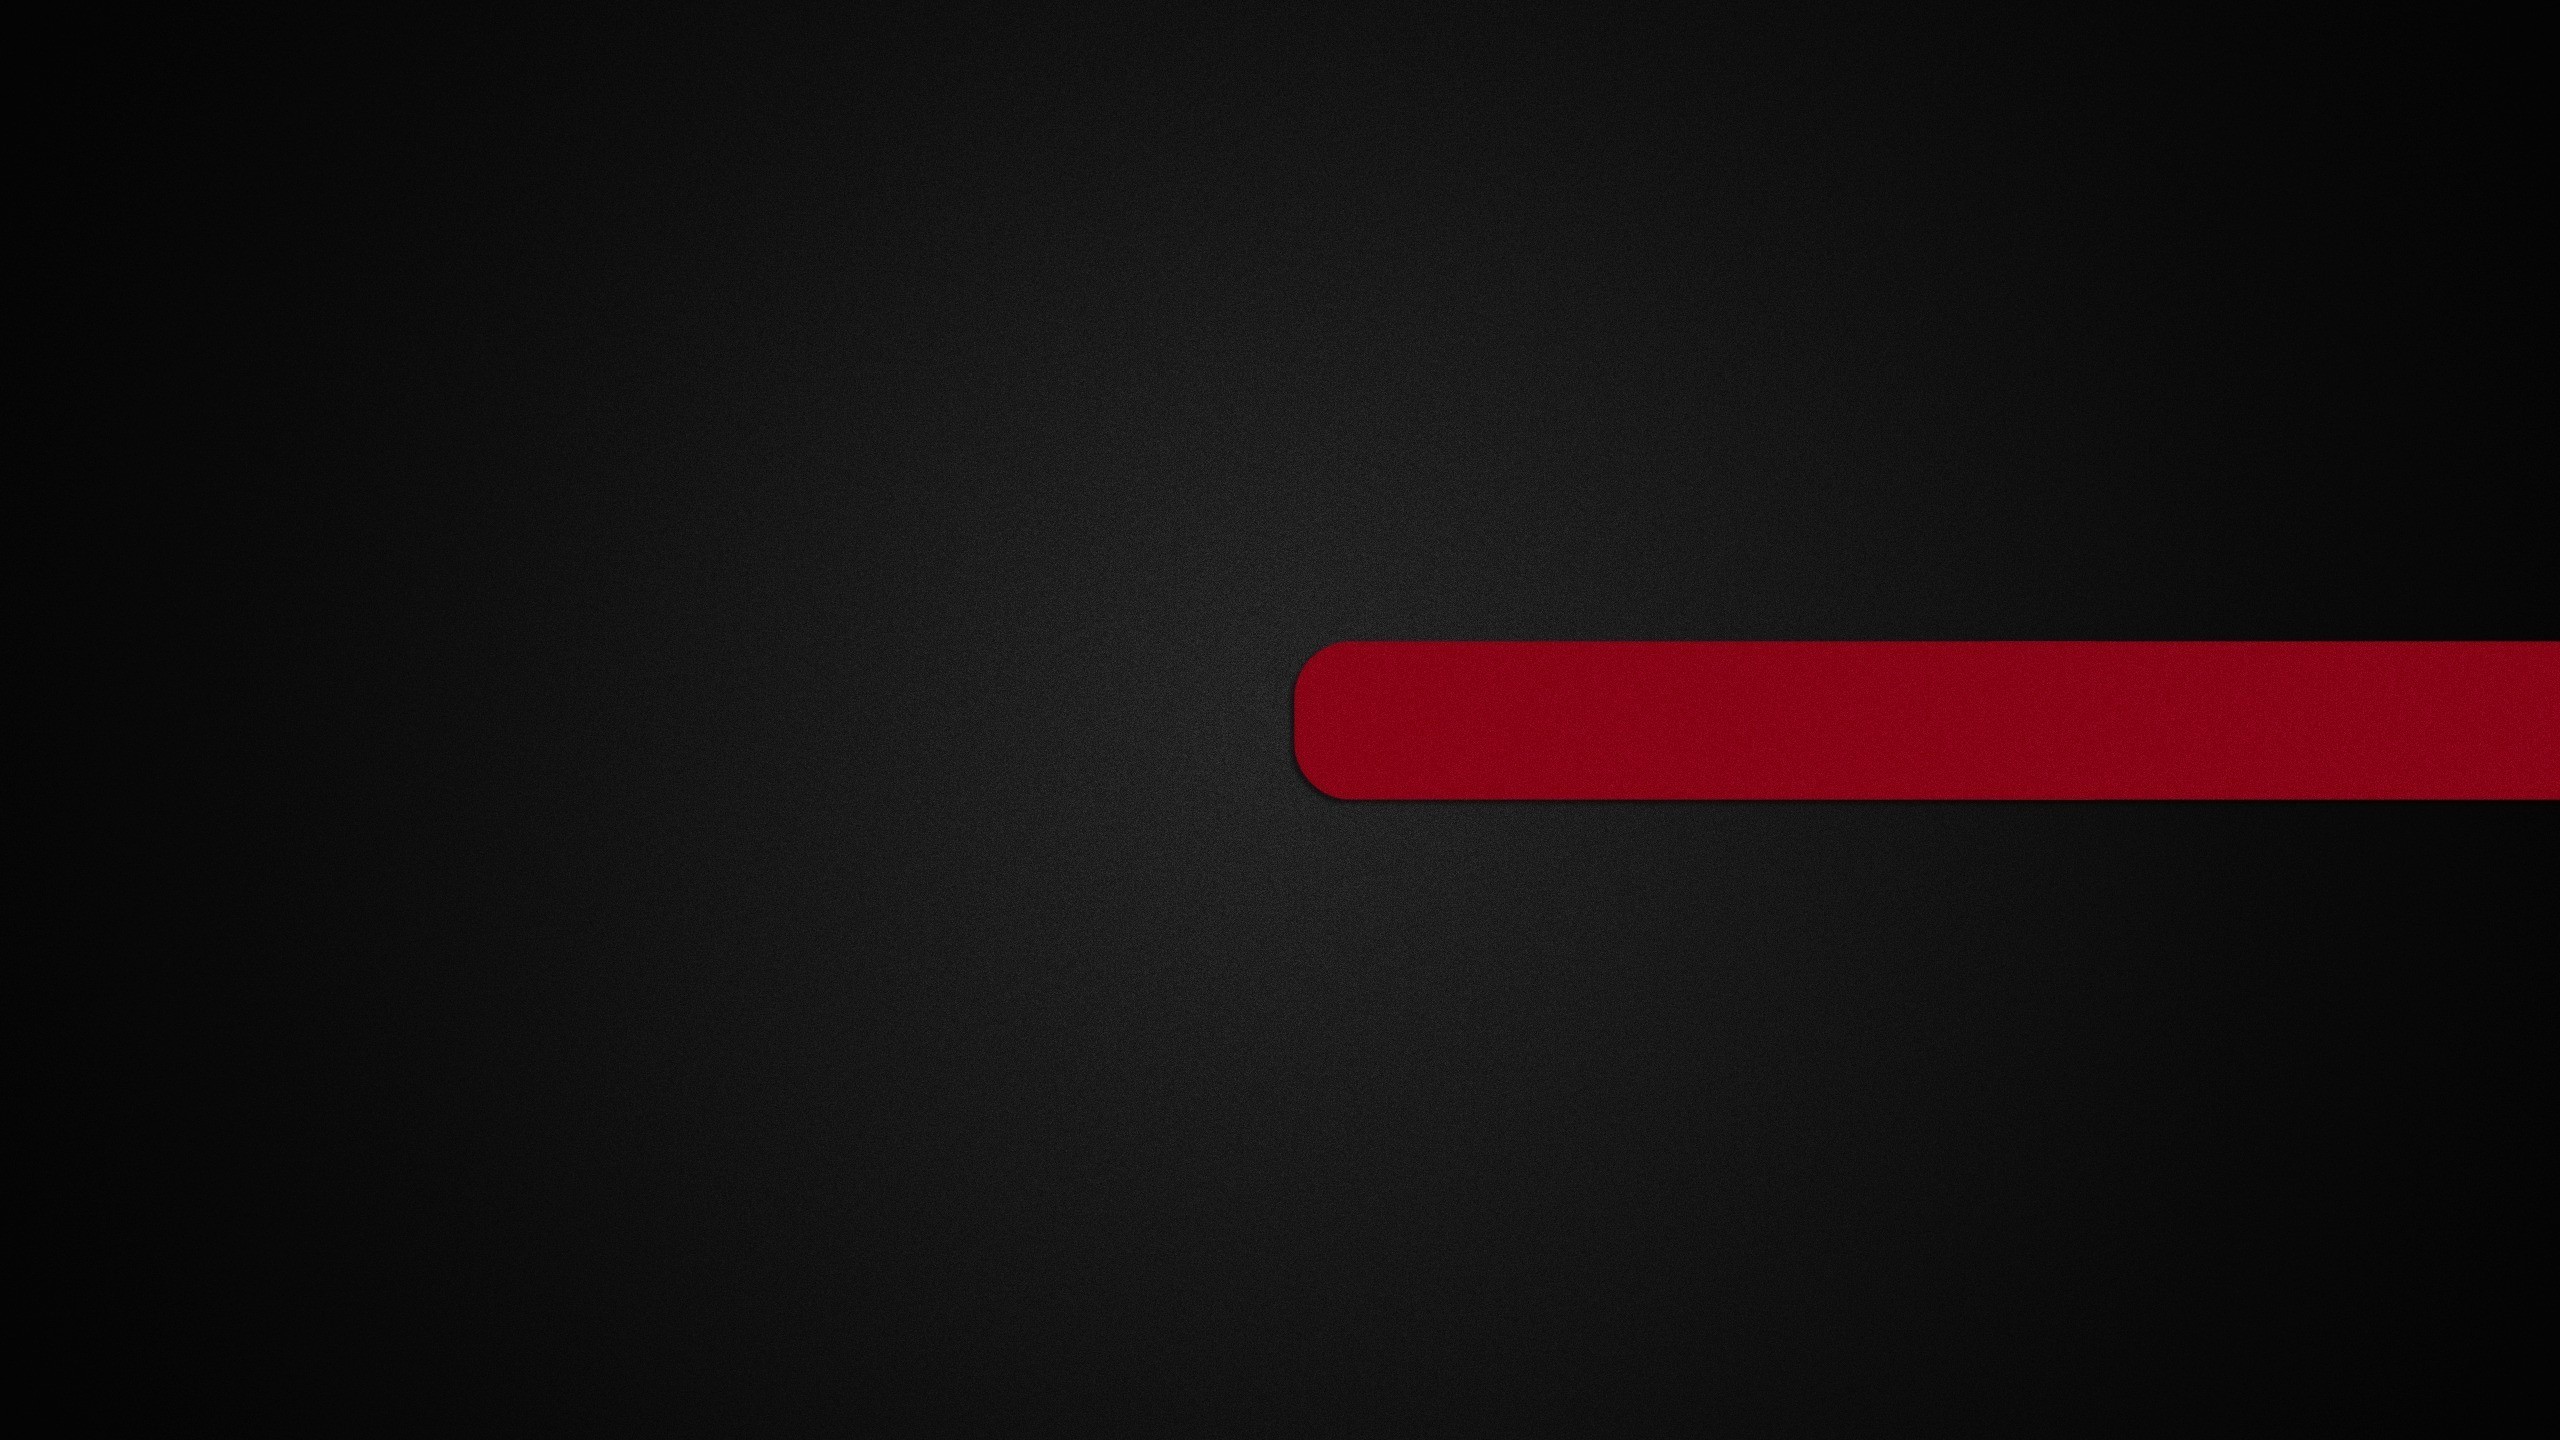 Black And Red Abstract Wallpaper   HD Wallpapers Pretty